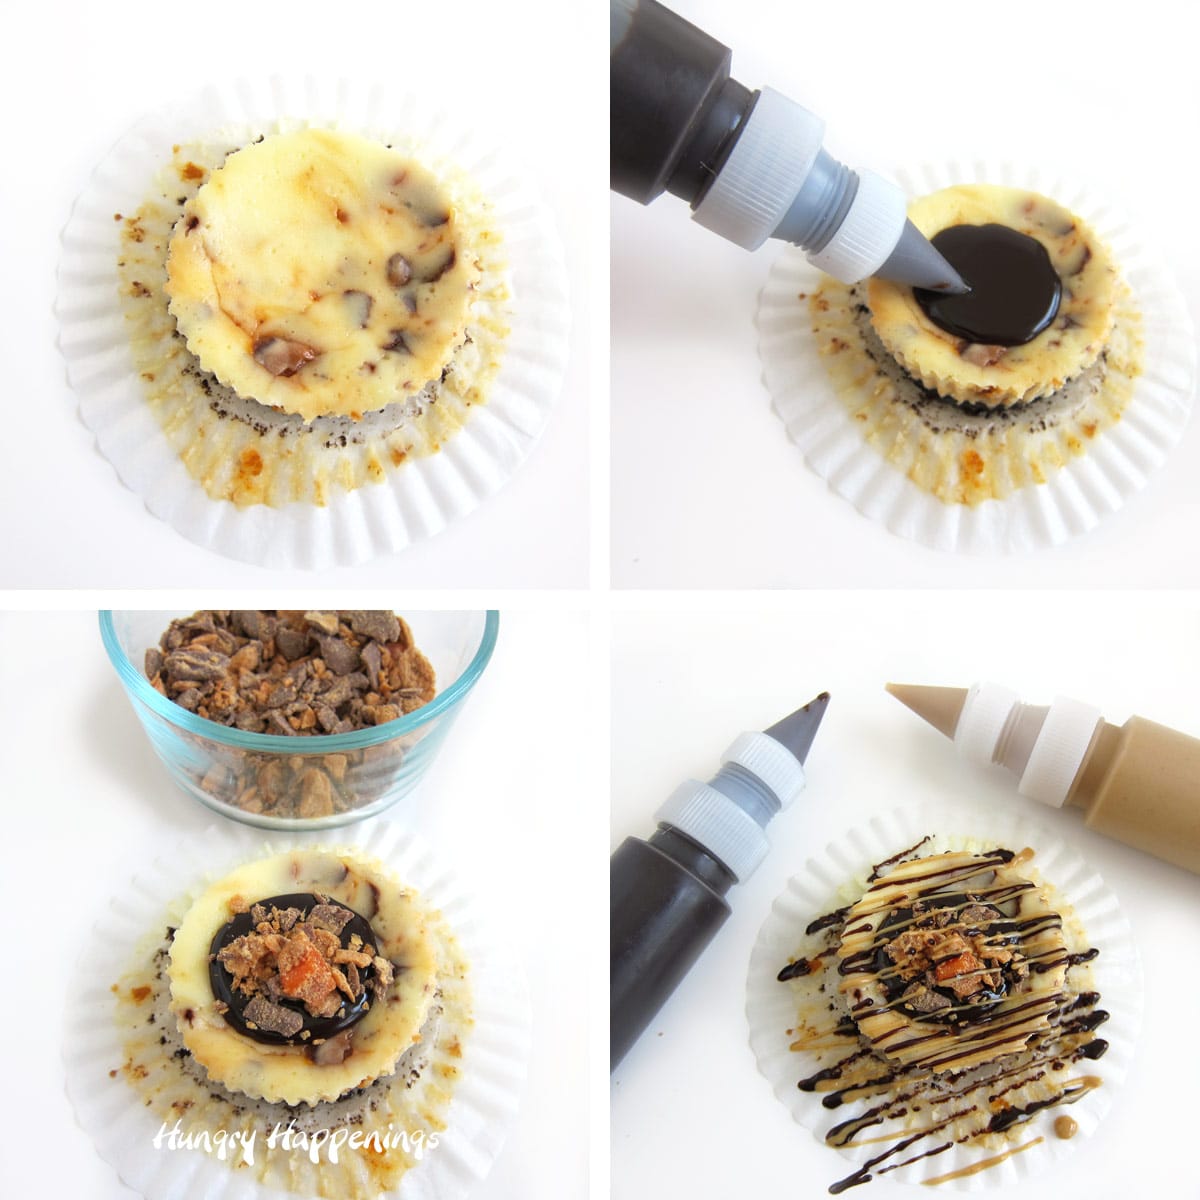 Butterfinger mini cheesecakes step by step process picture.